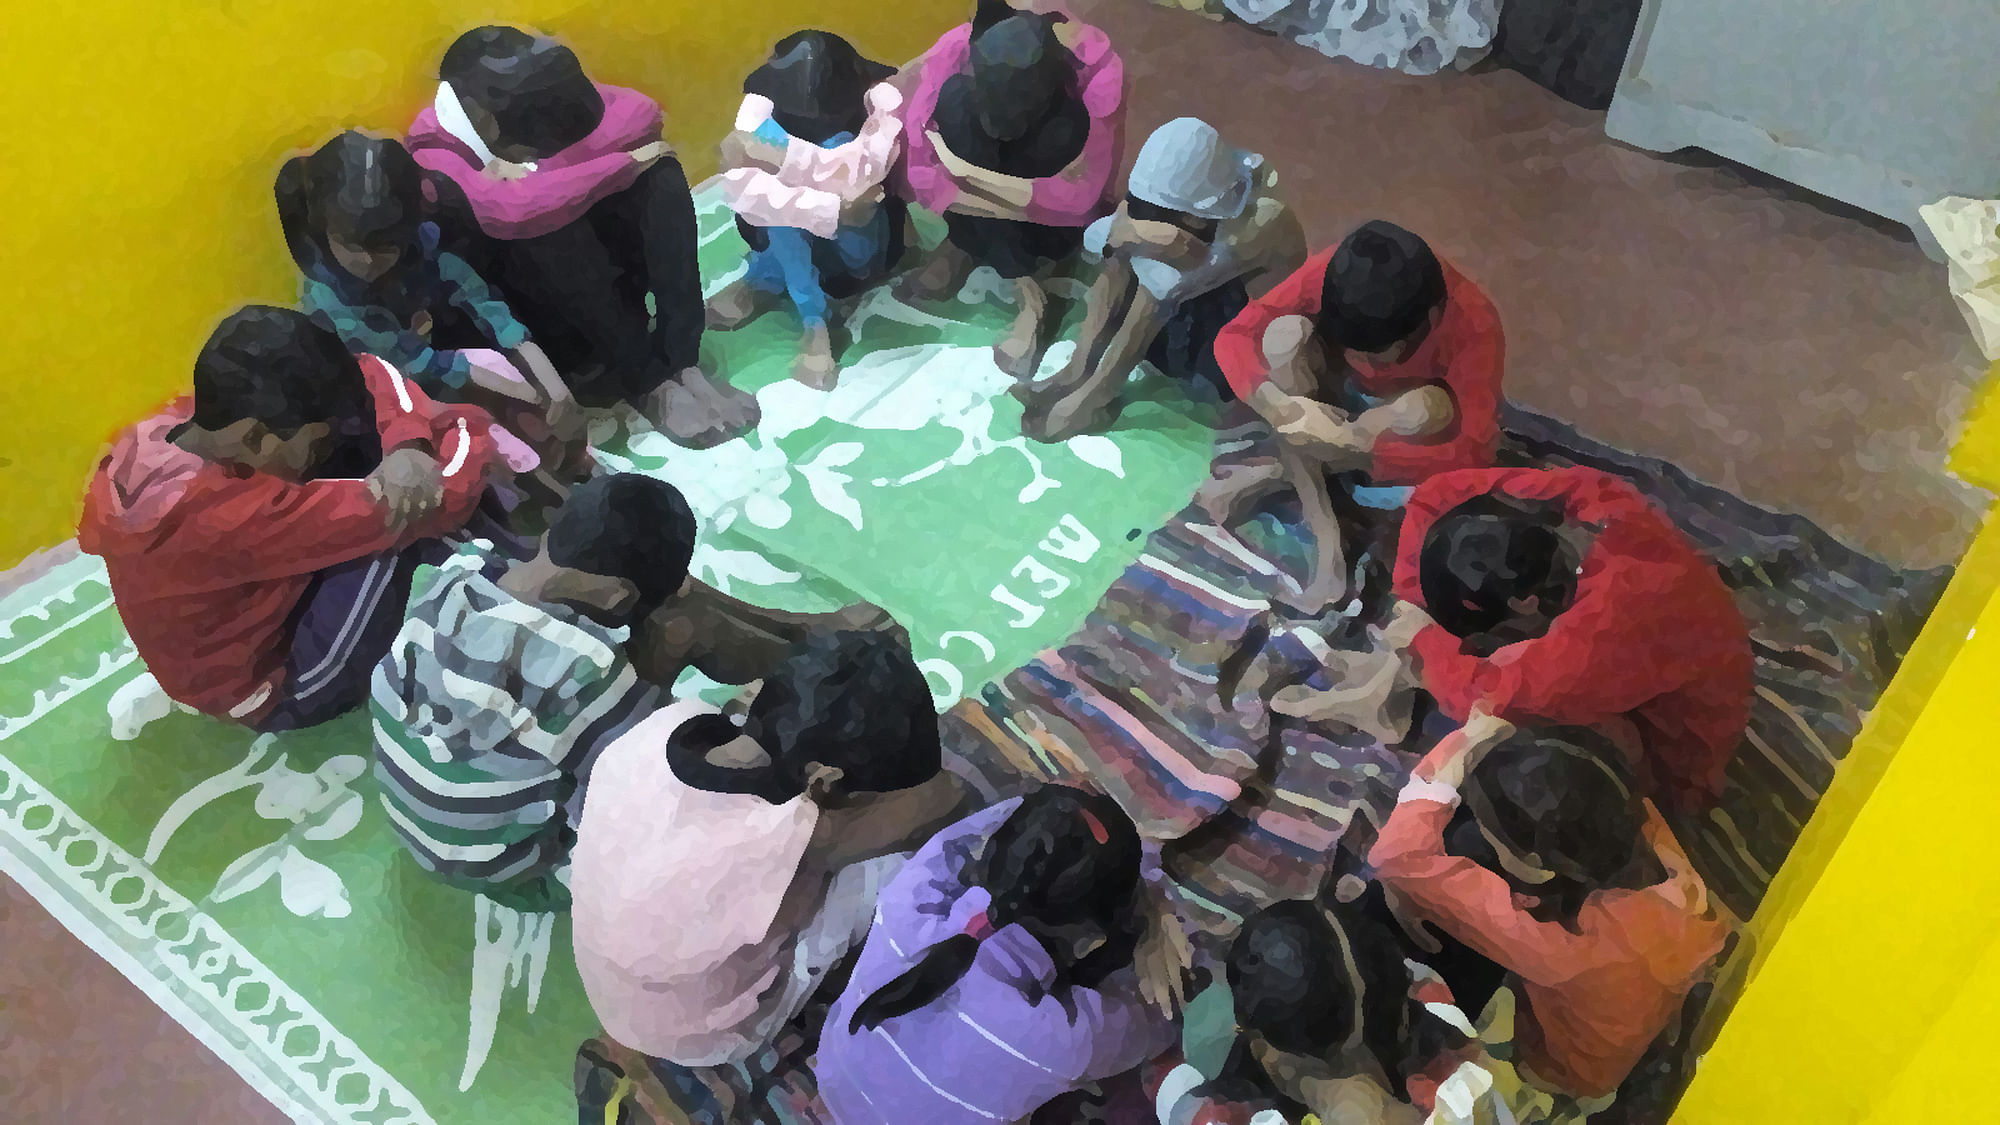 Tumpa has organised a shelter where children of sex workers huddle together and share stories of woe. (Photo Courtesy: Tumpa Adhikary; Image altered by <b>The Quint</b>)